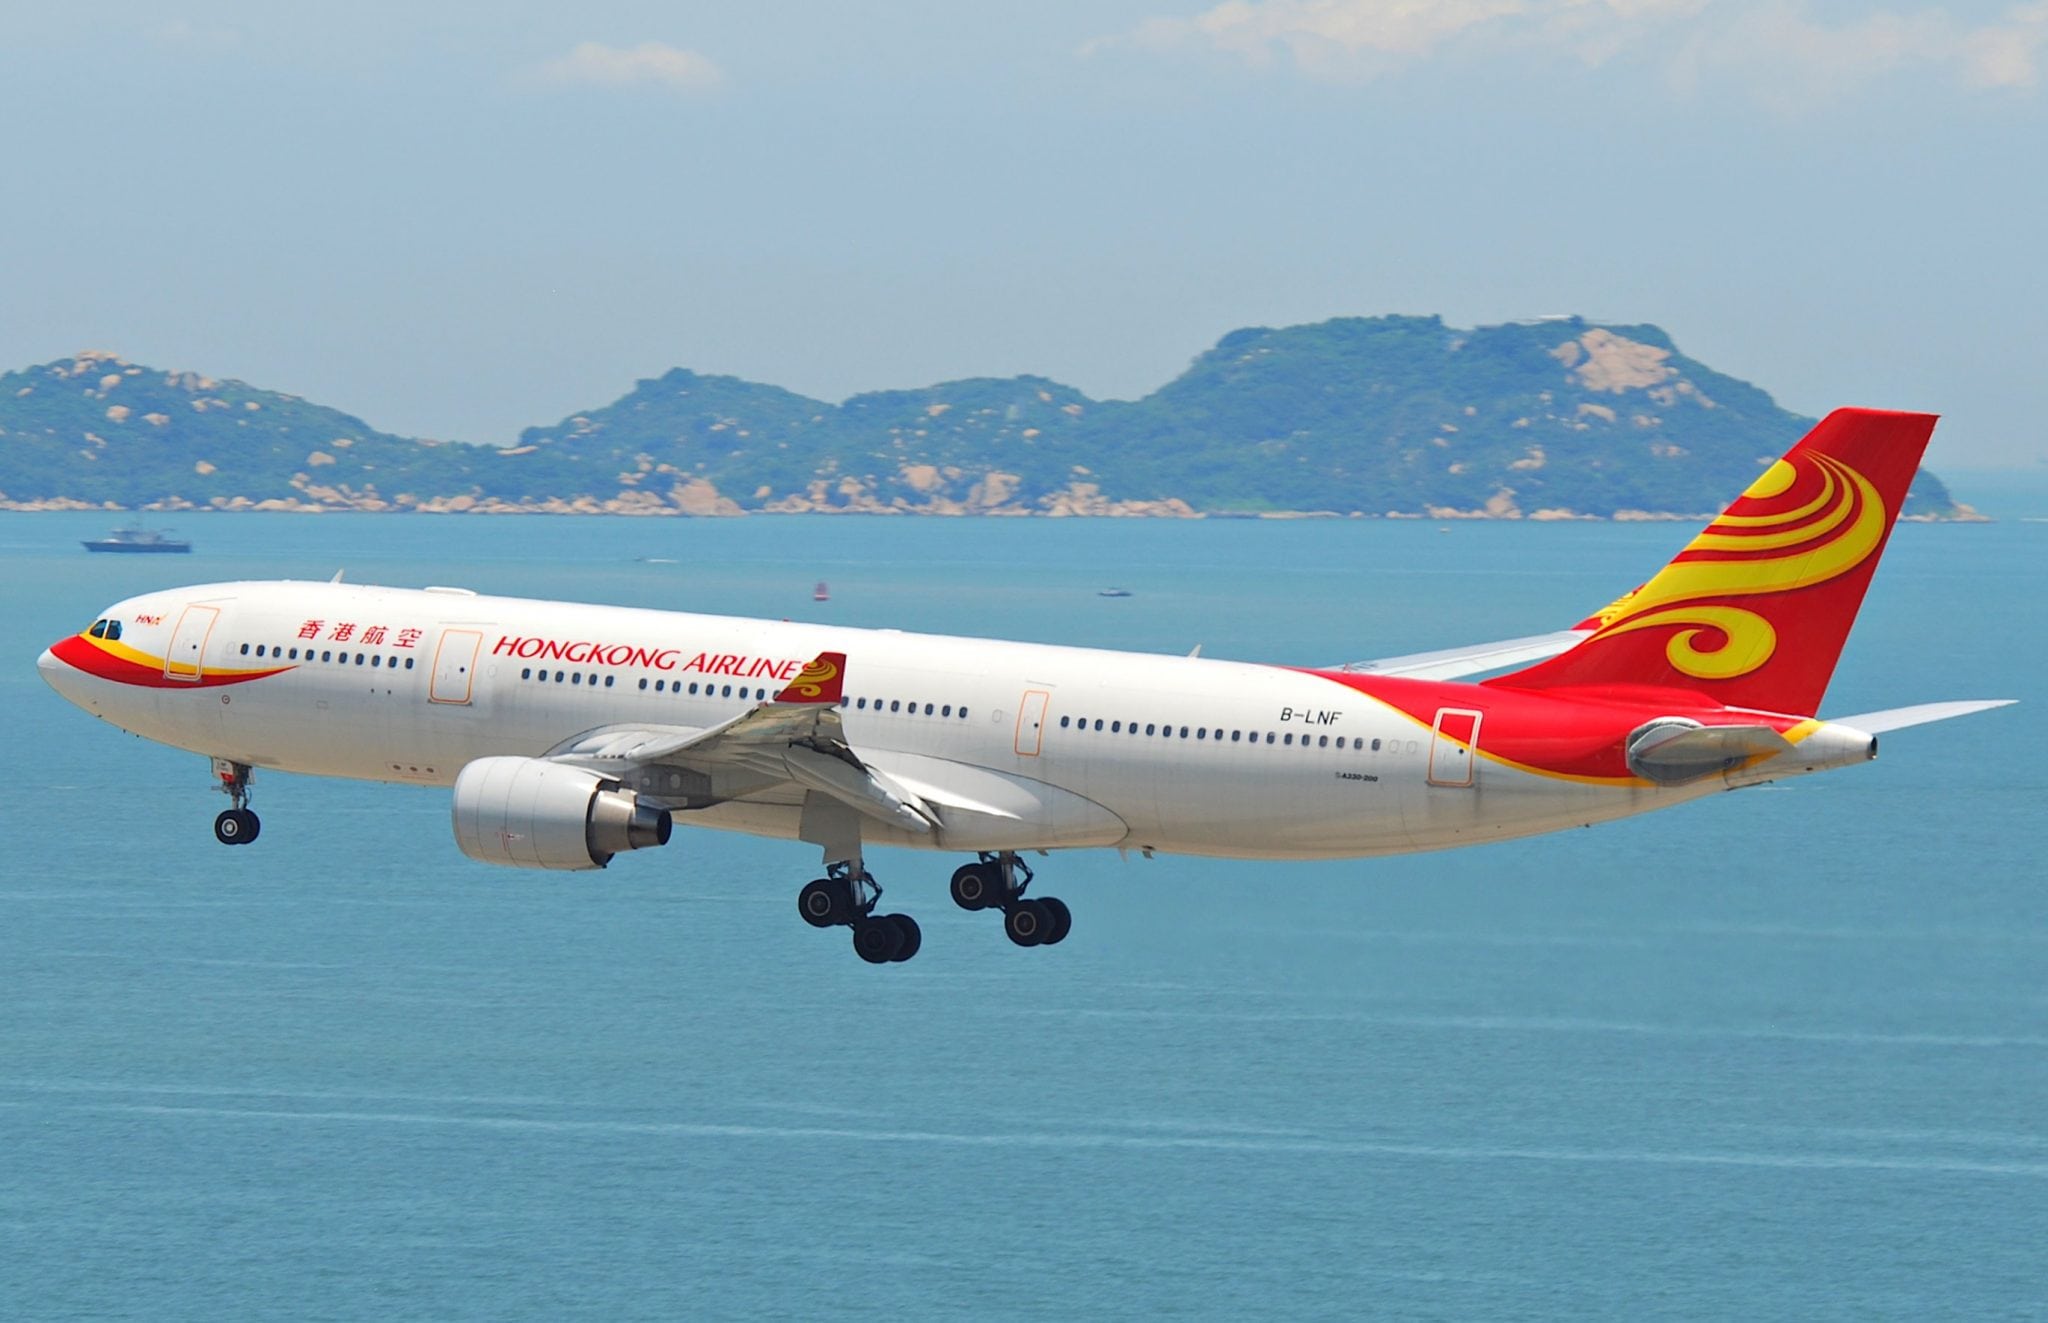 Hong Kong Airlines signed an agreement earlier this summer at the Paris Air Show with AirCom Pacific to install IFEC systems on-board Hong Kong Airlines aircraft